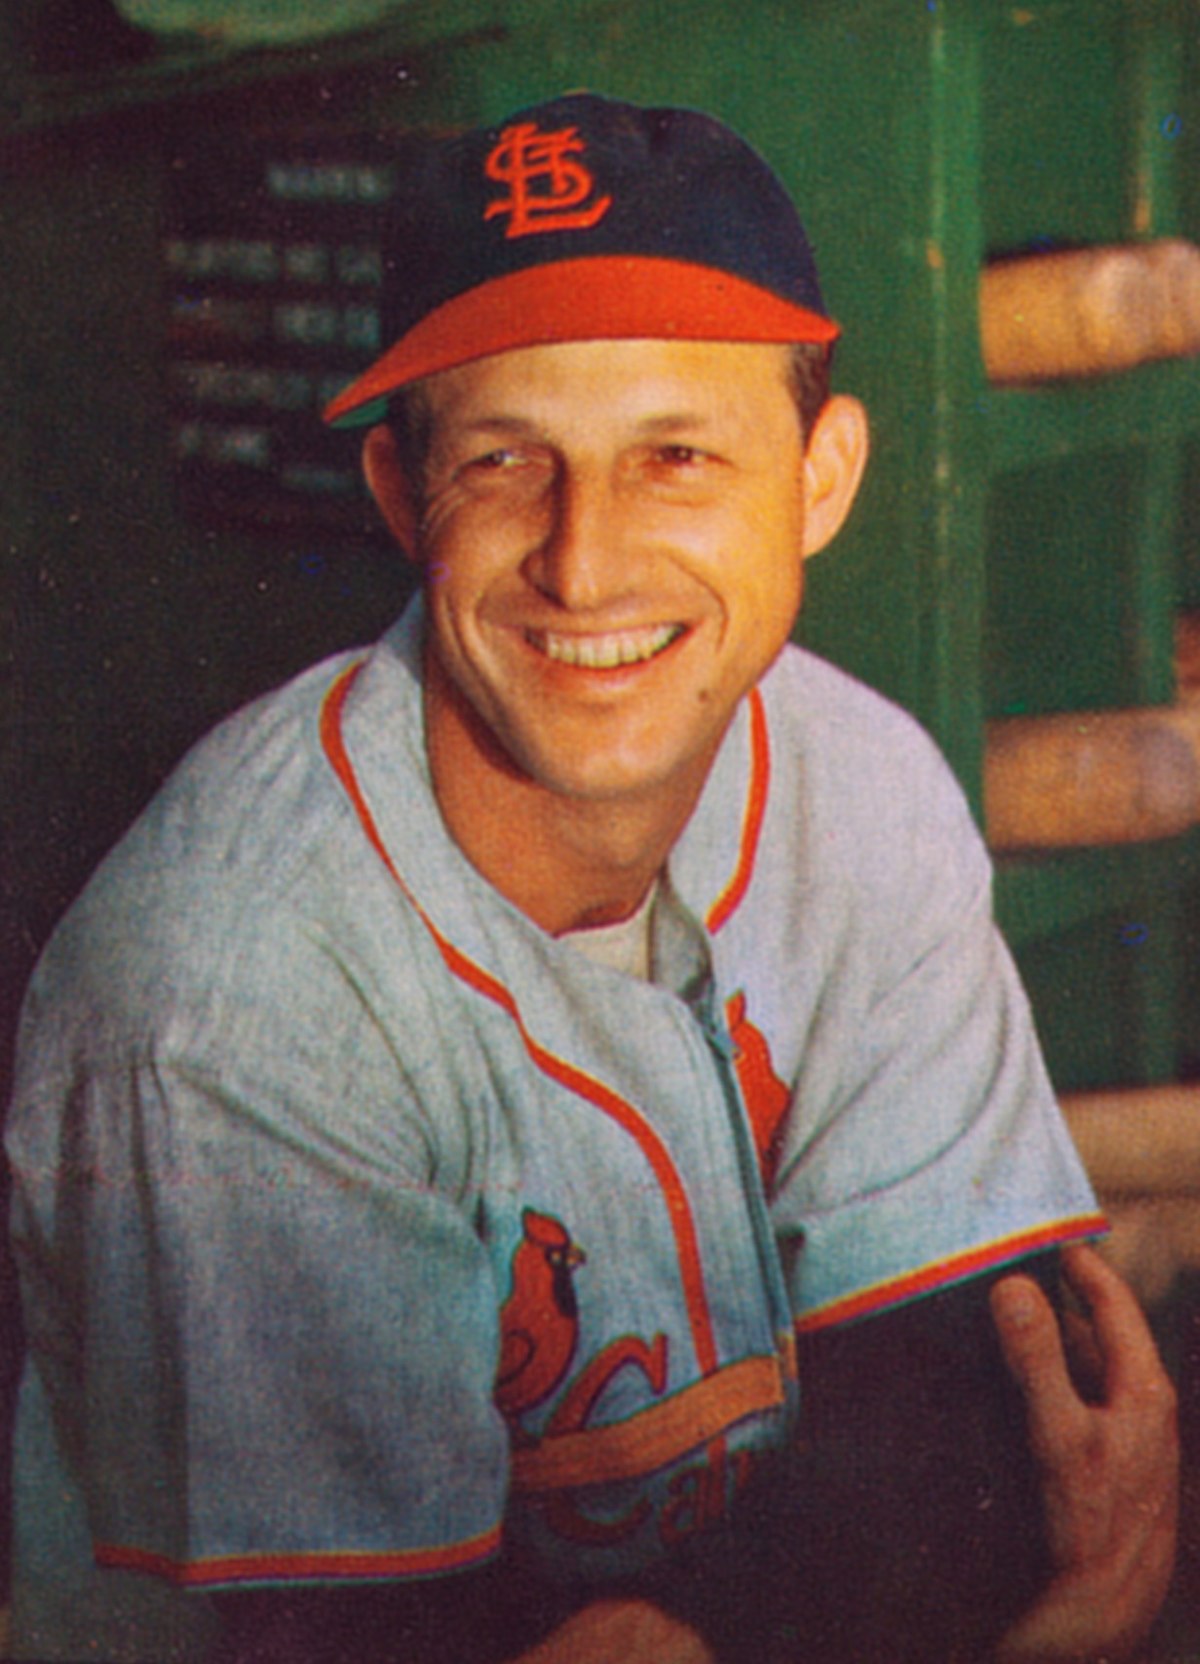 stan musial number 6